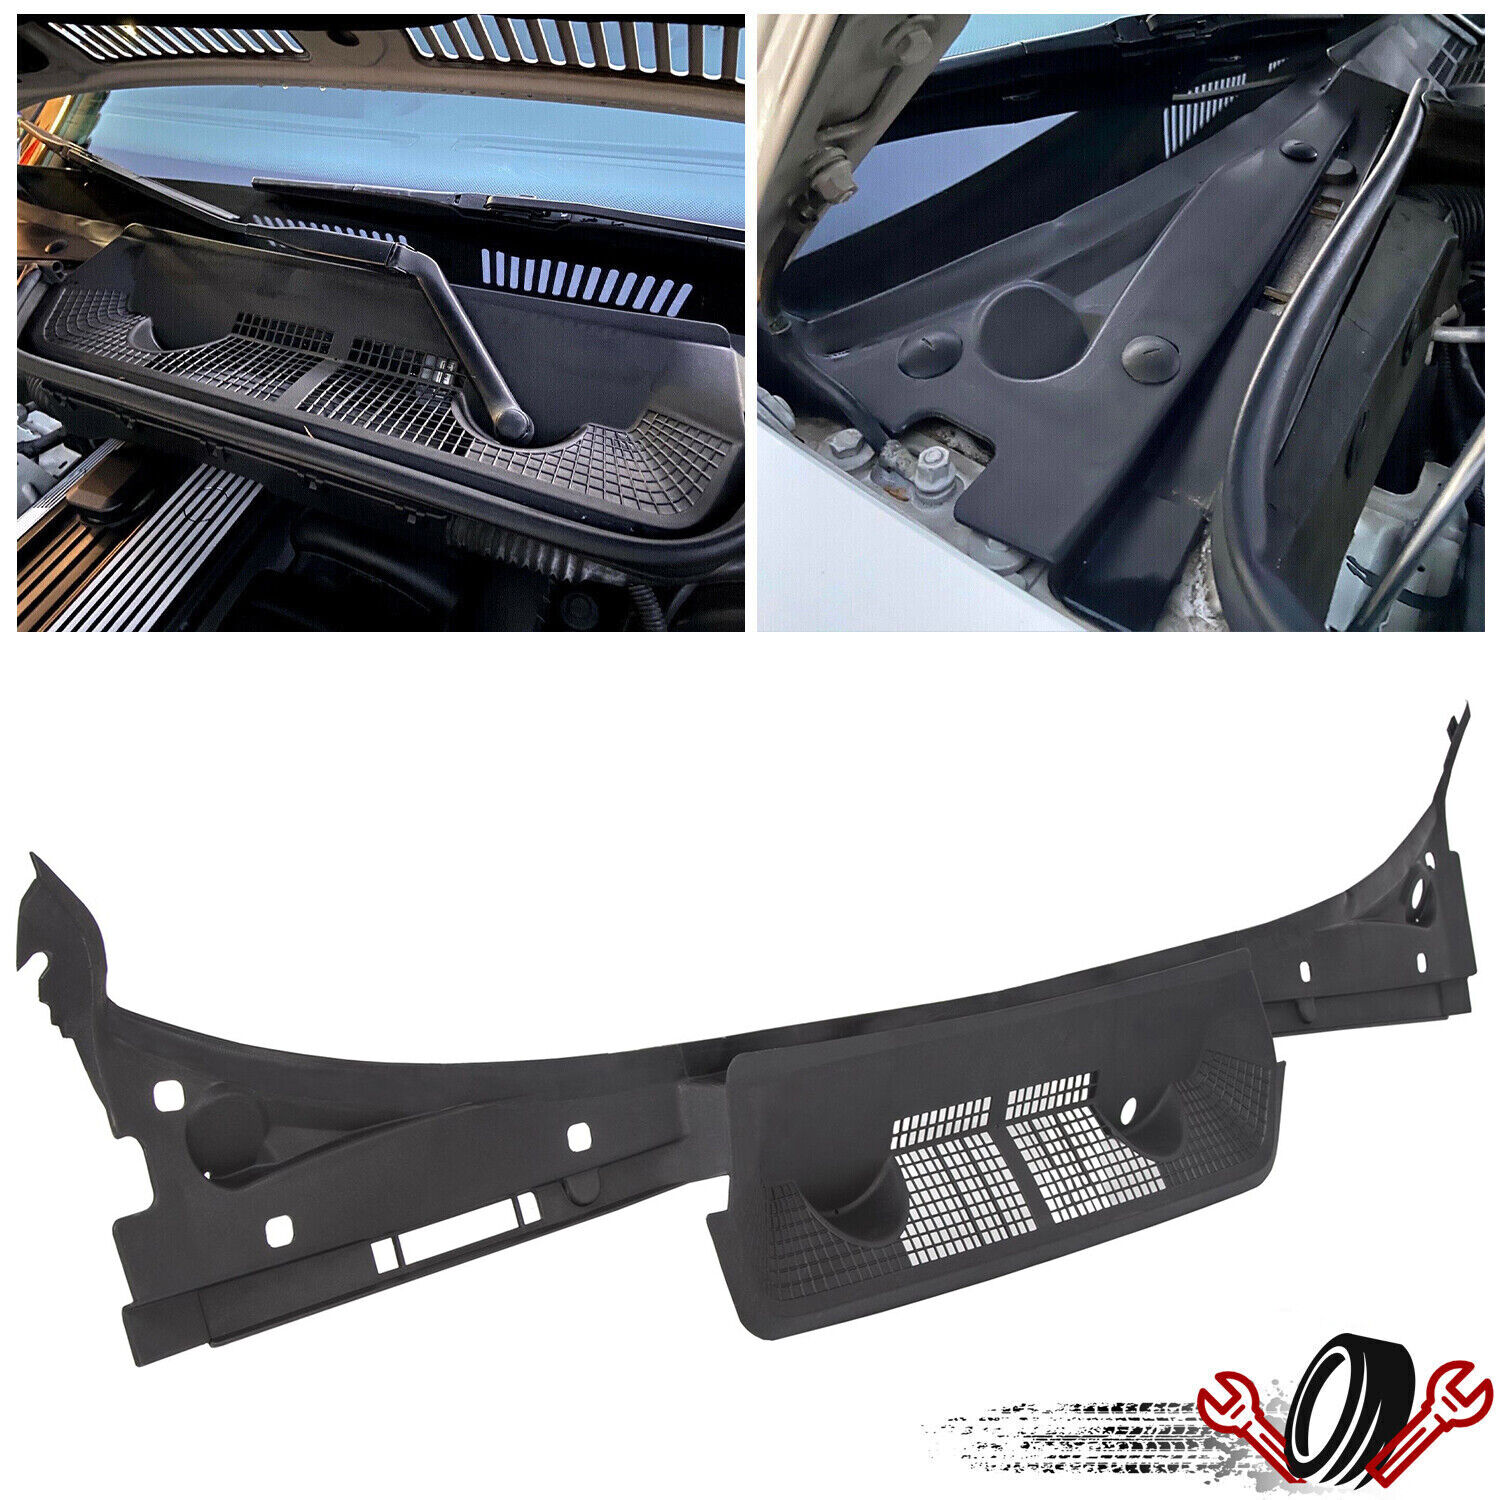 For BMW E36 Windshield Wiper Motor Cover Assembly Hood Cowl Trim Covering